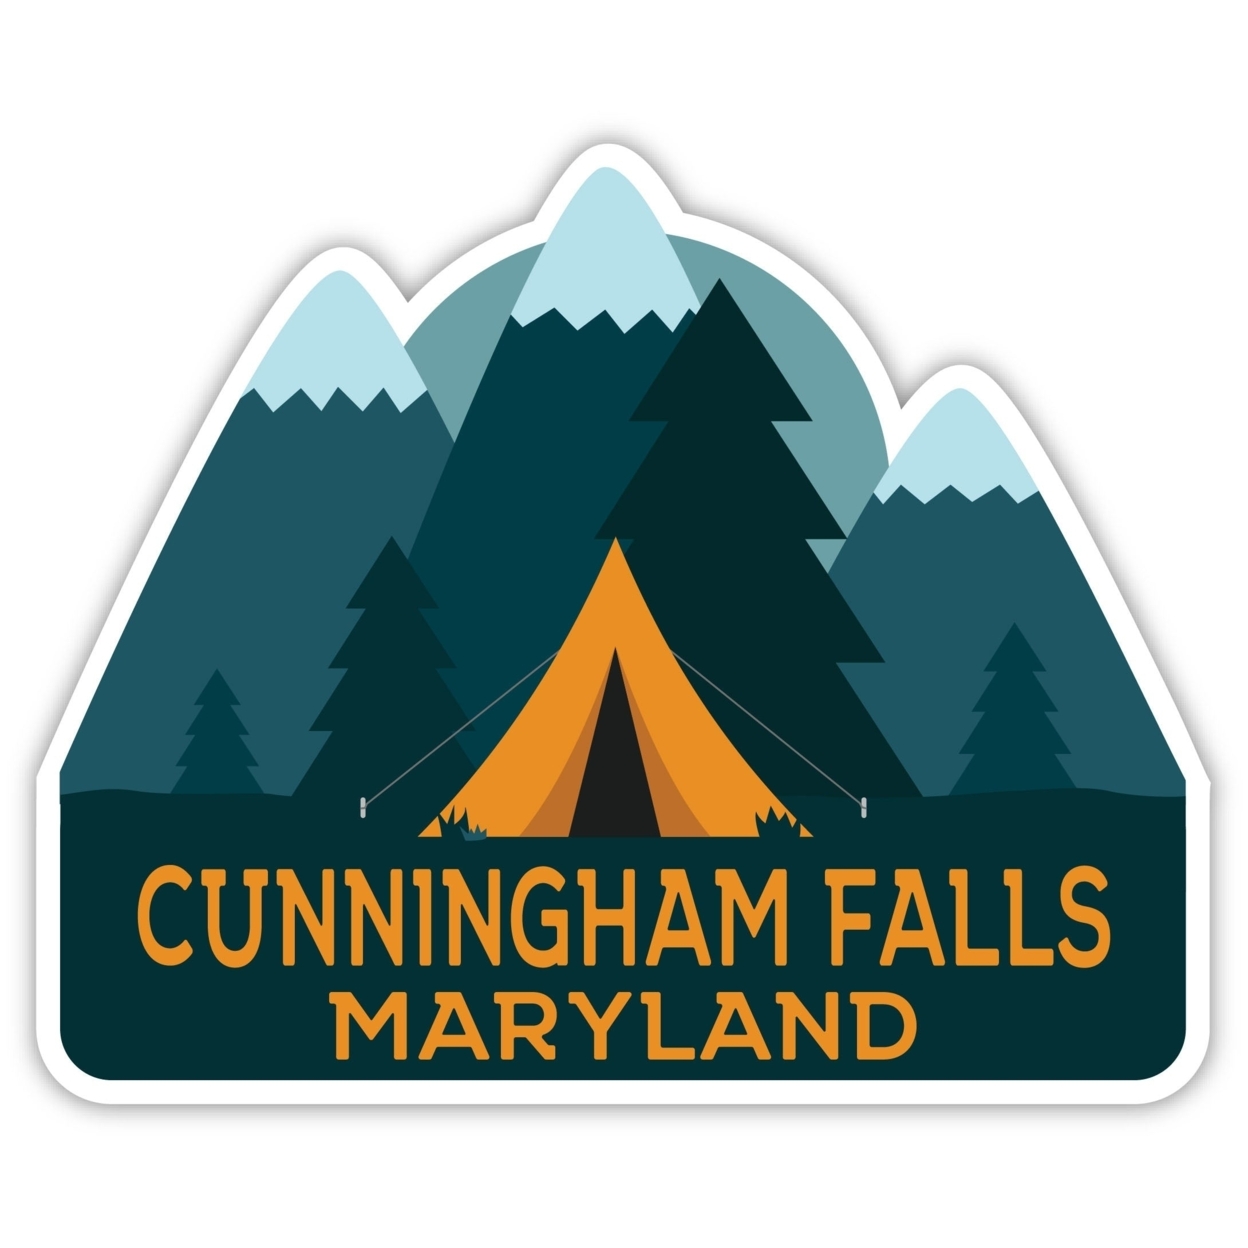 Cunningham Falls Maryland Souvenir Decorative Stickers (Choose Theme And Size) - 4-Pack, 10-Inch, Tent